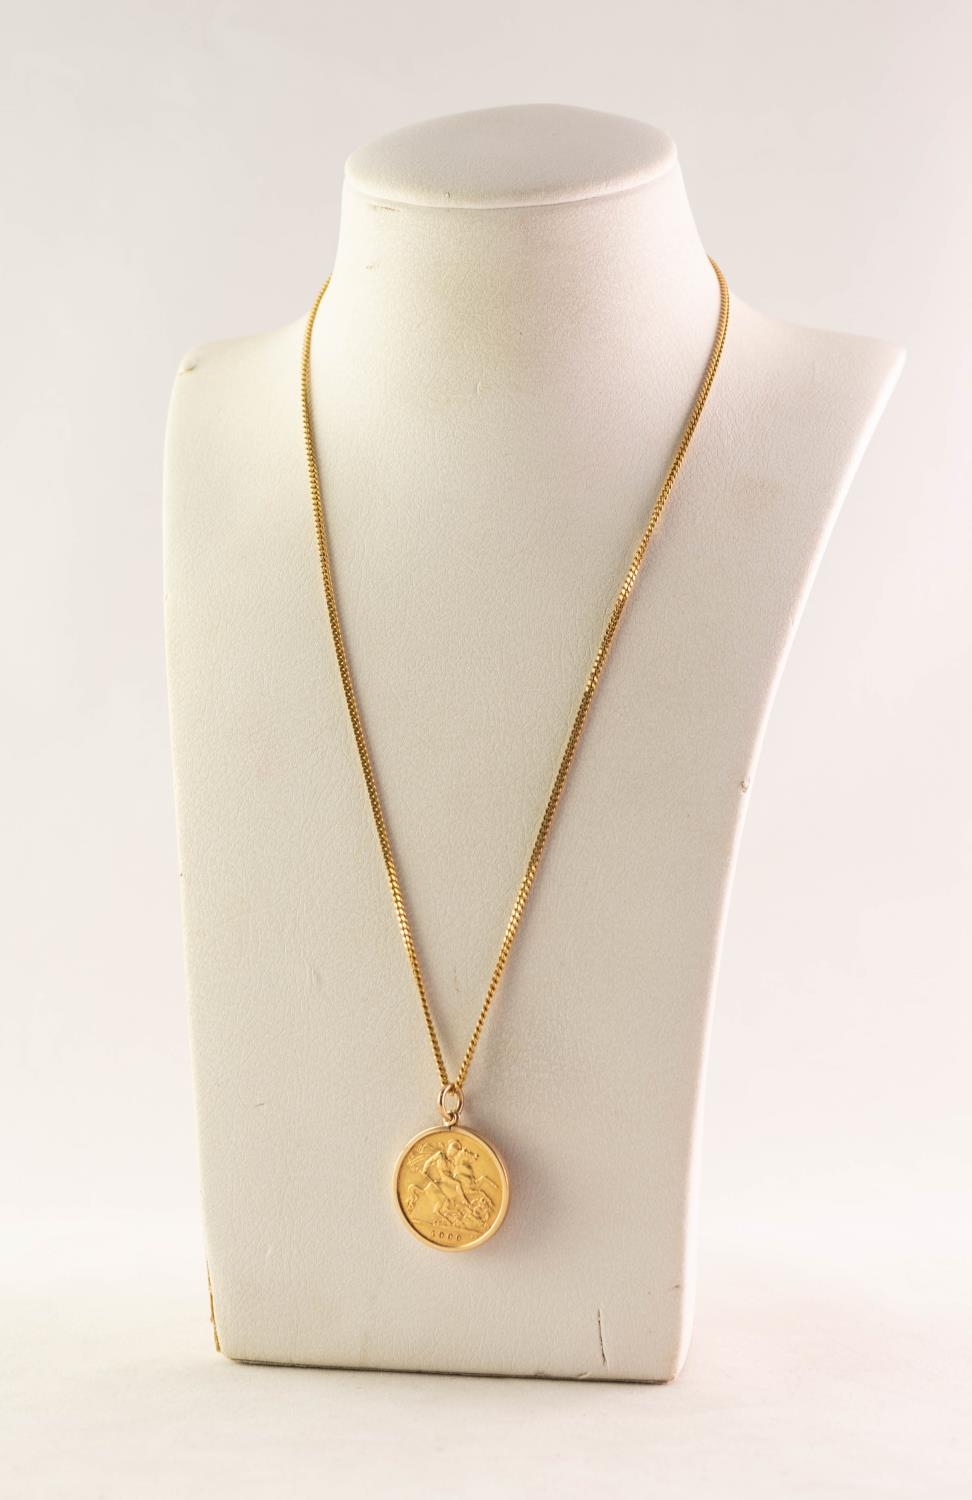 EDWARD VII 1909 GOLD HALF SOVEREIGN, loose framed as a pendant and the 9ct GOLD FINE CHAIN NECKLACE,